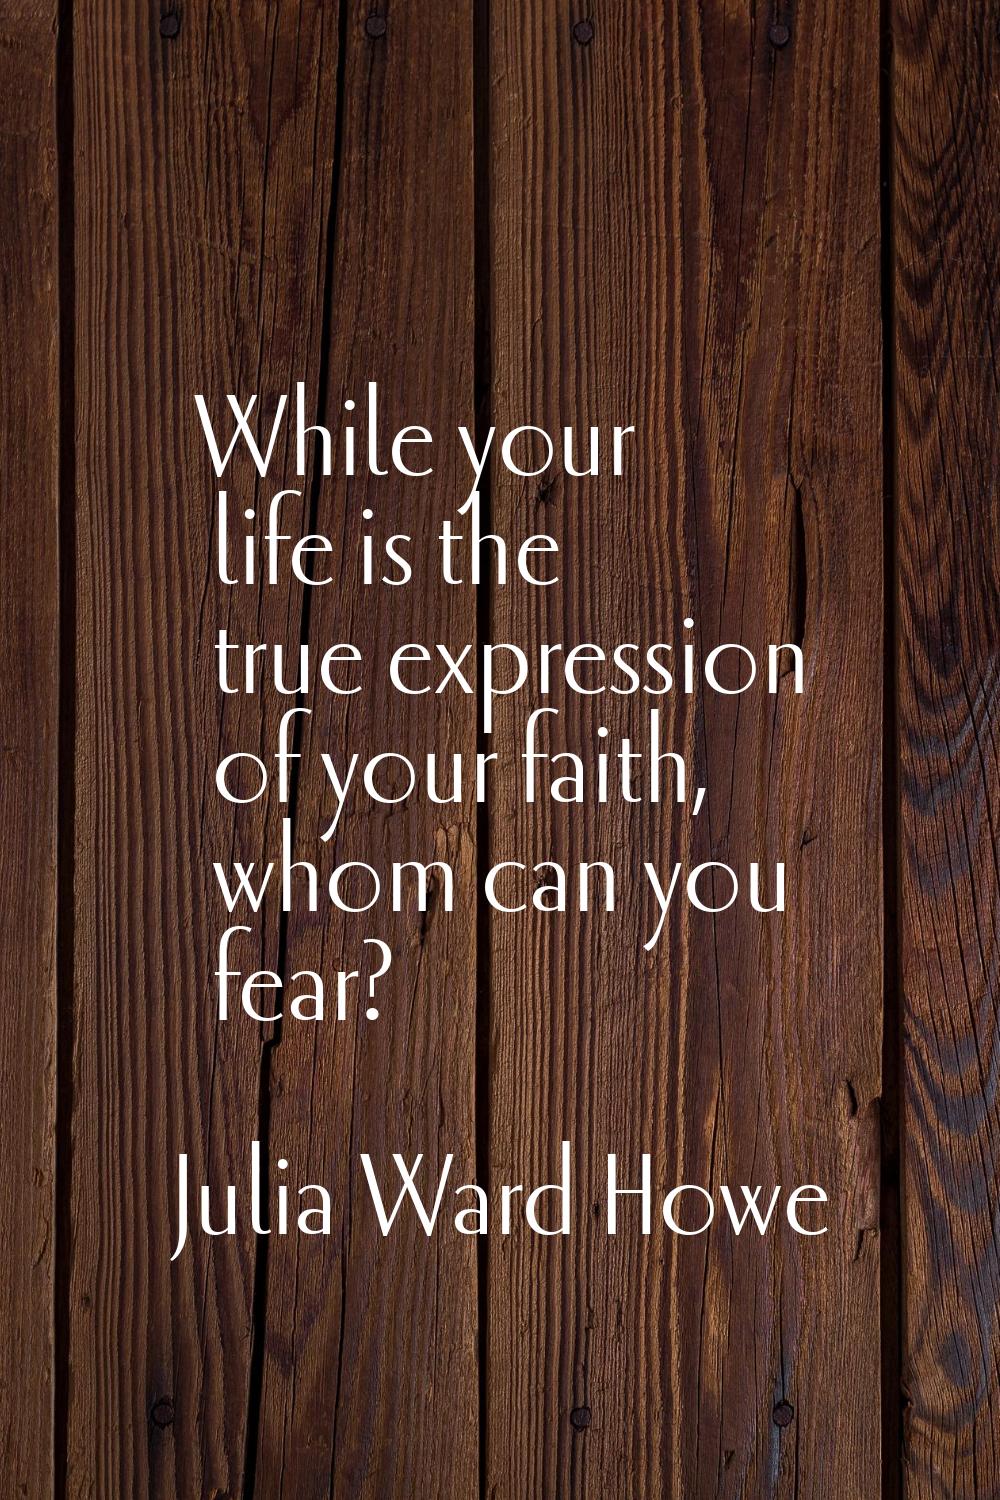 While your life is the true expression of your faith, whom can you fear?